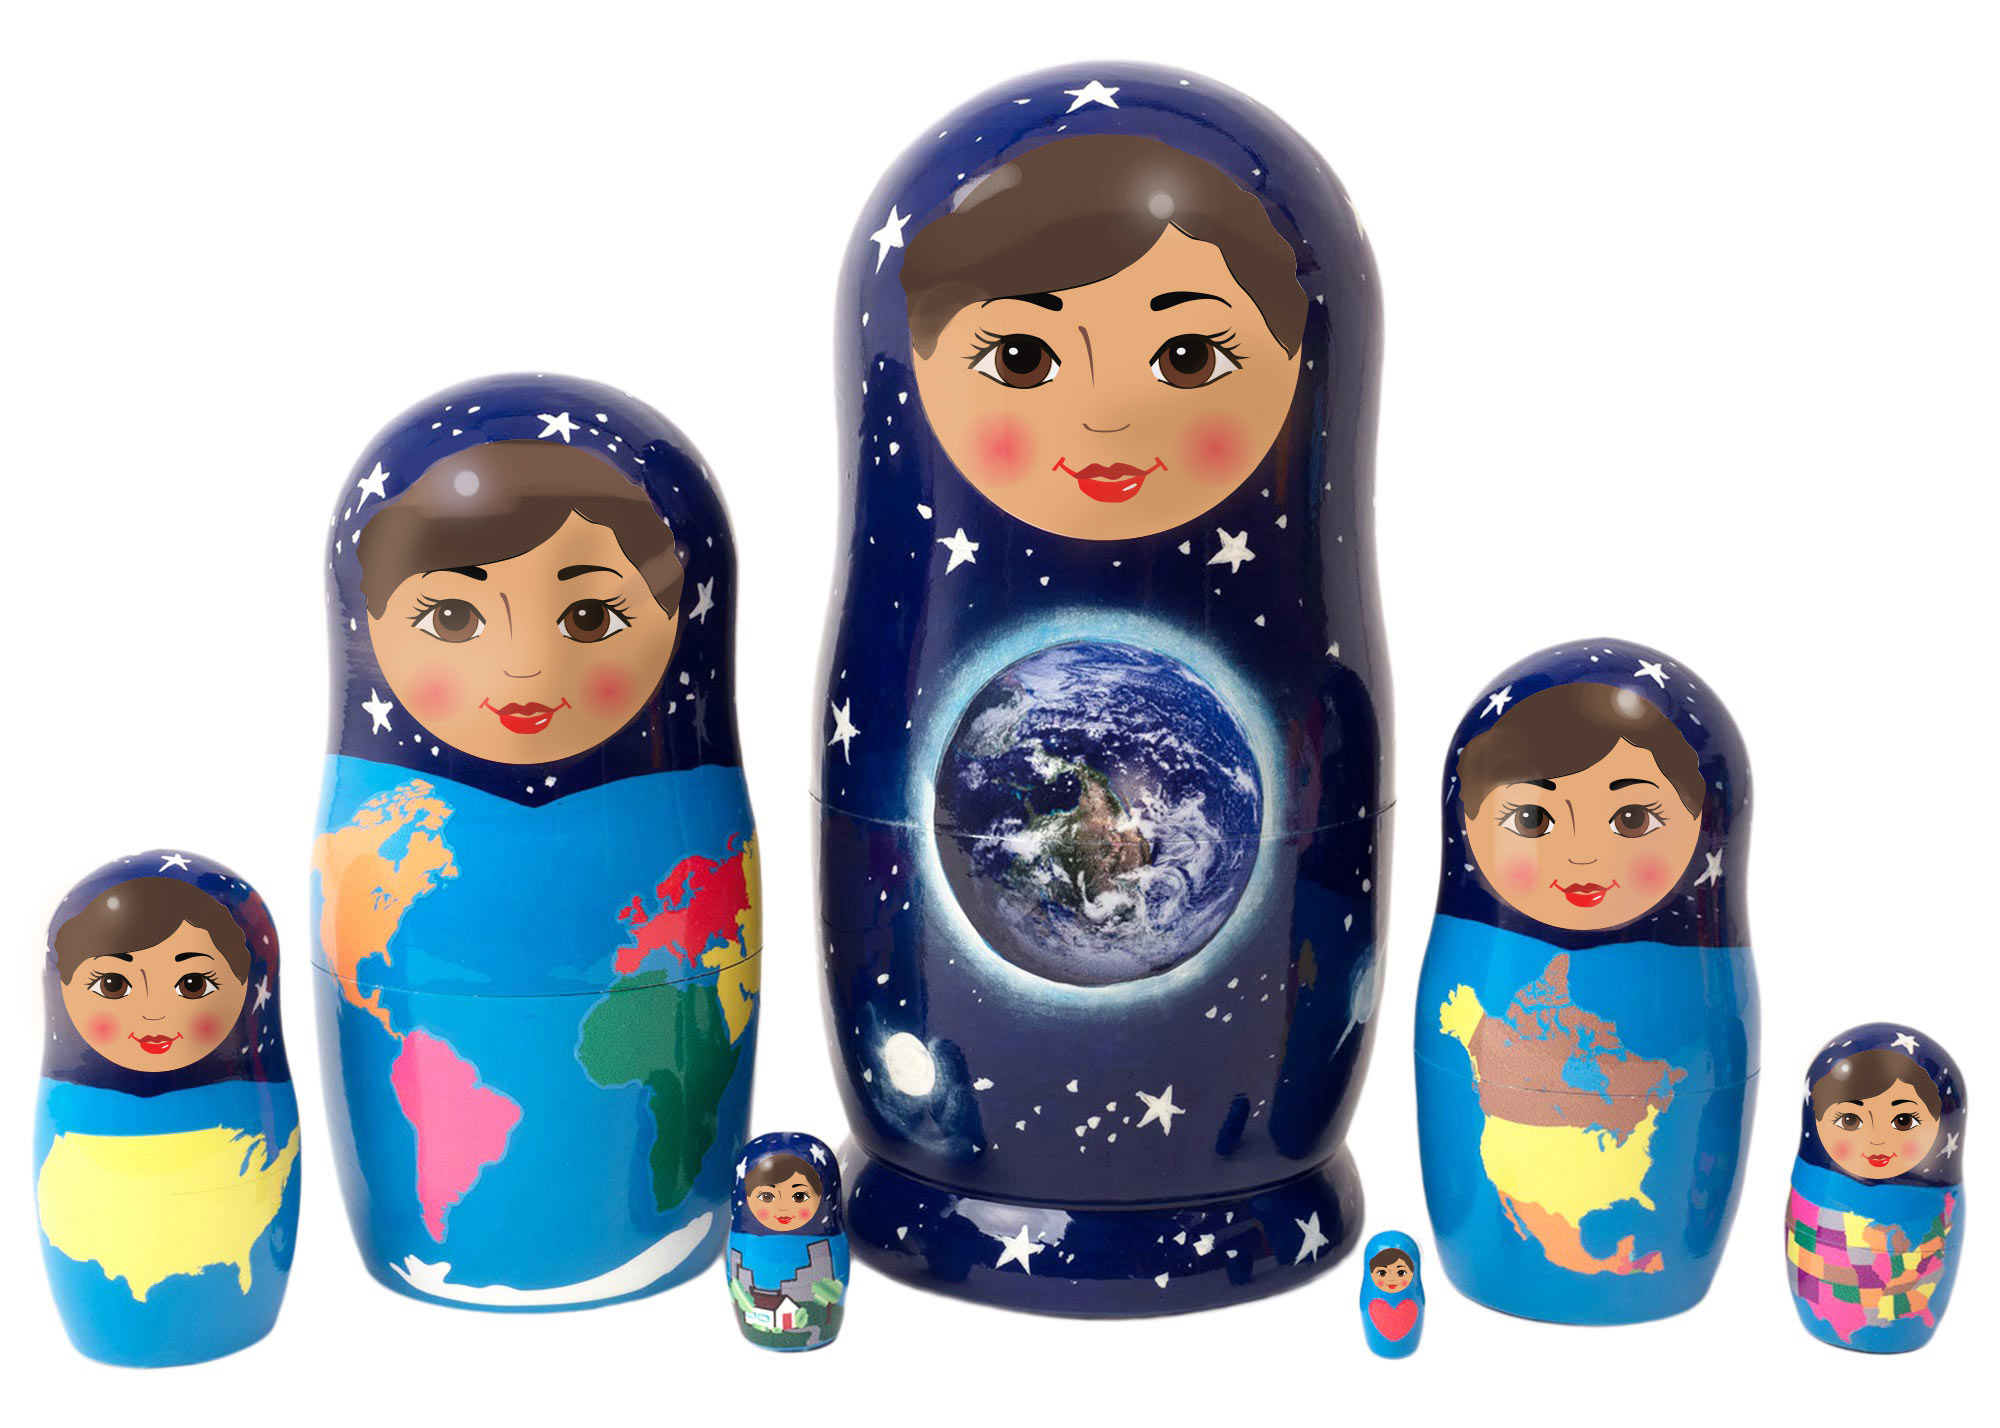 Buy Multicultural USA Geography Doll 7pc./8"  at GoldenCockerel.com